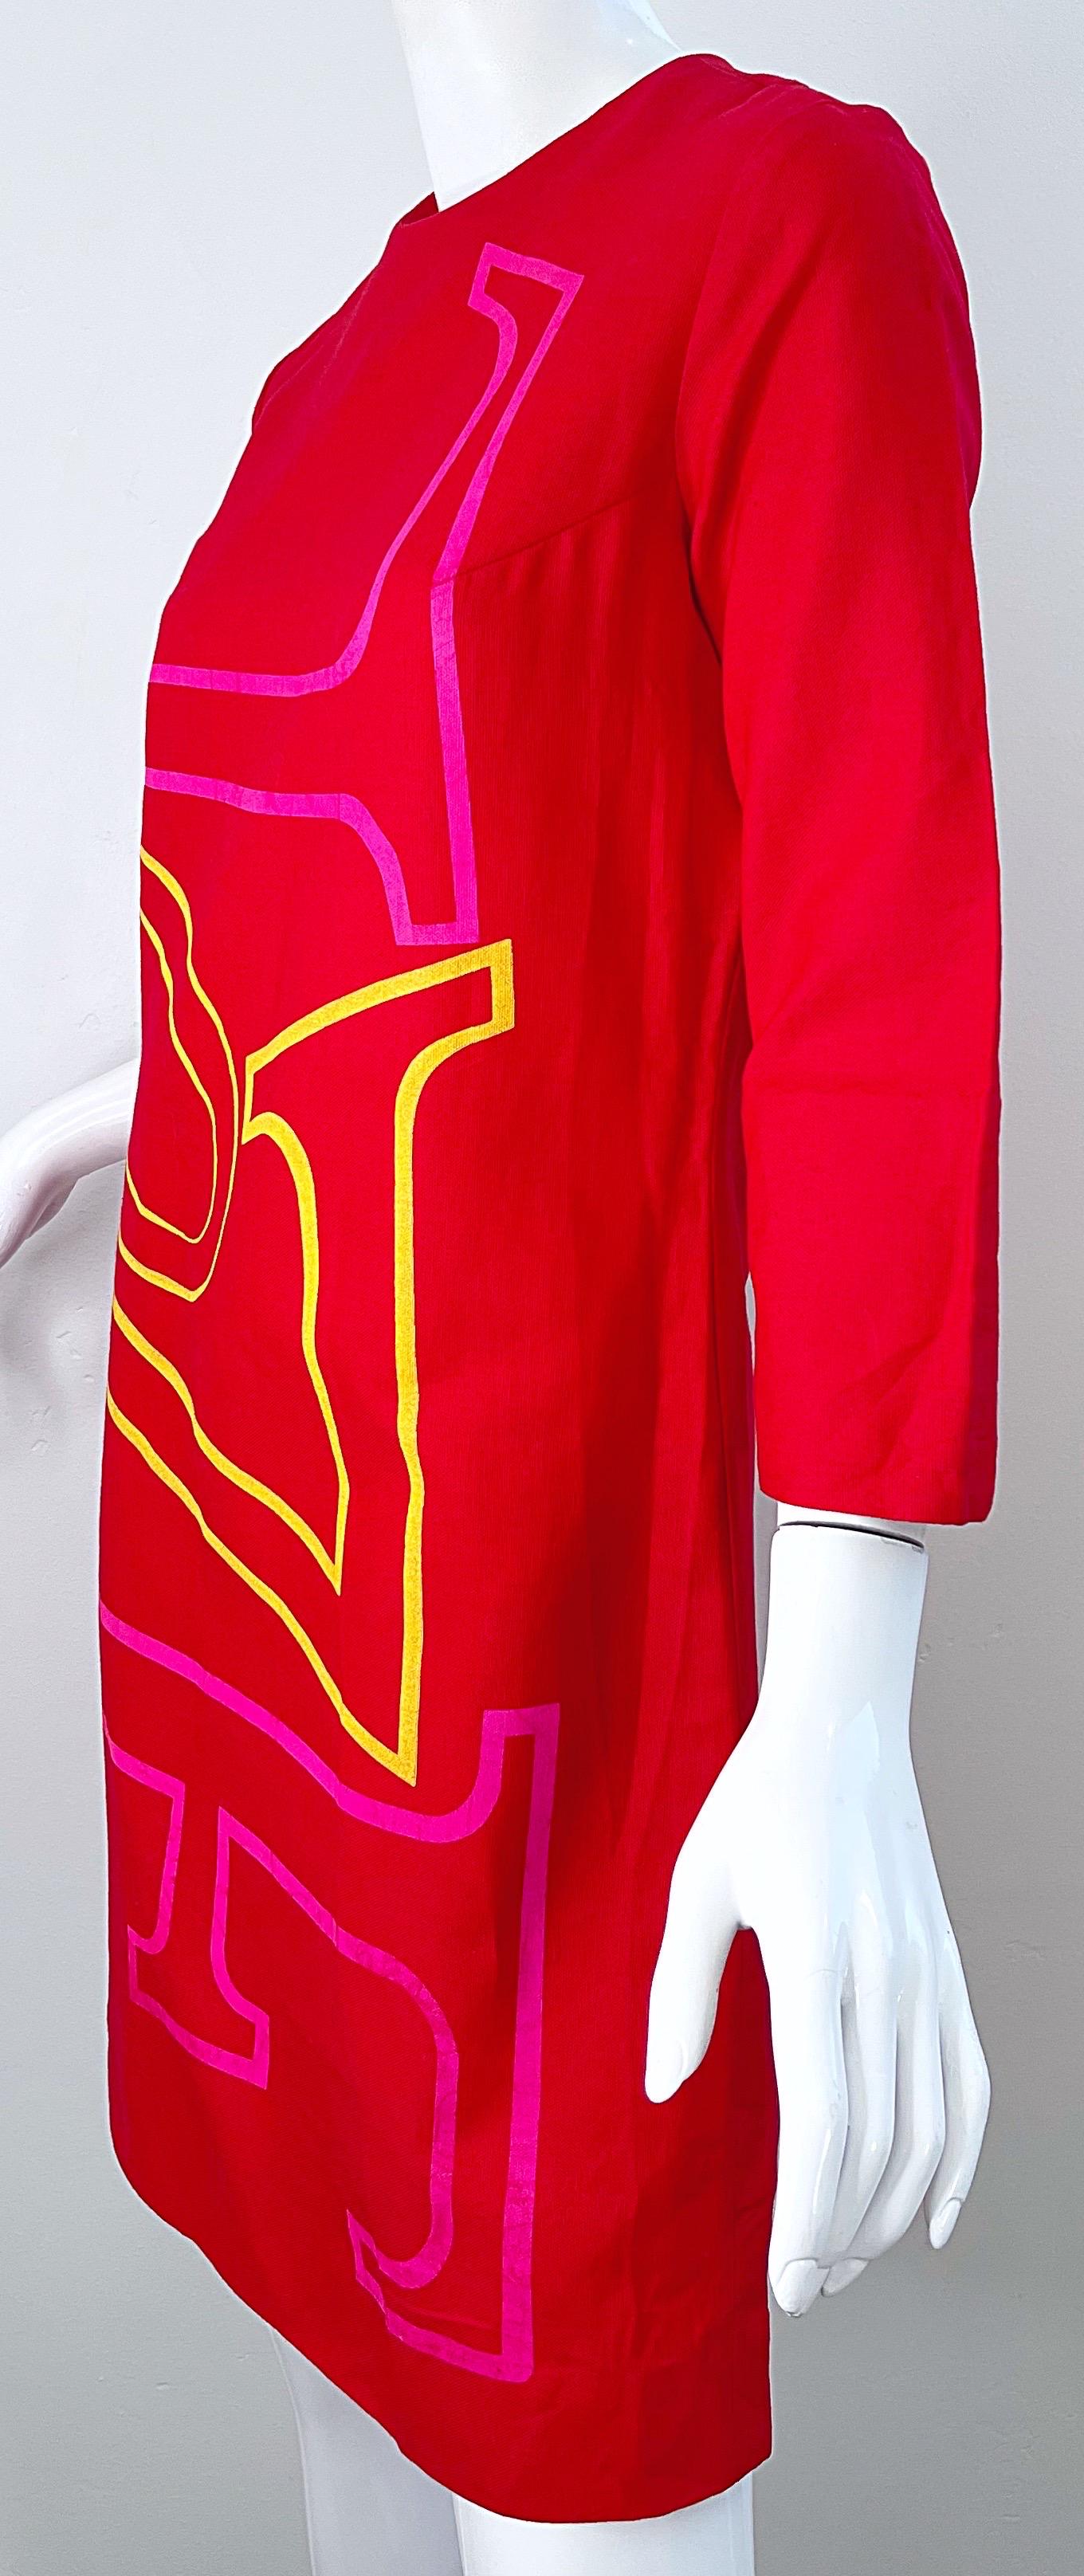 1960s Robert Indiana LOVE Hand Painted Cotton Red Vintage 60s Shift Dress For Sale 5